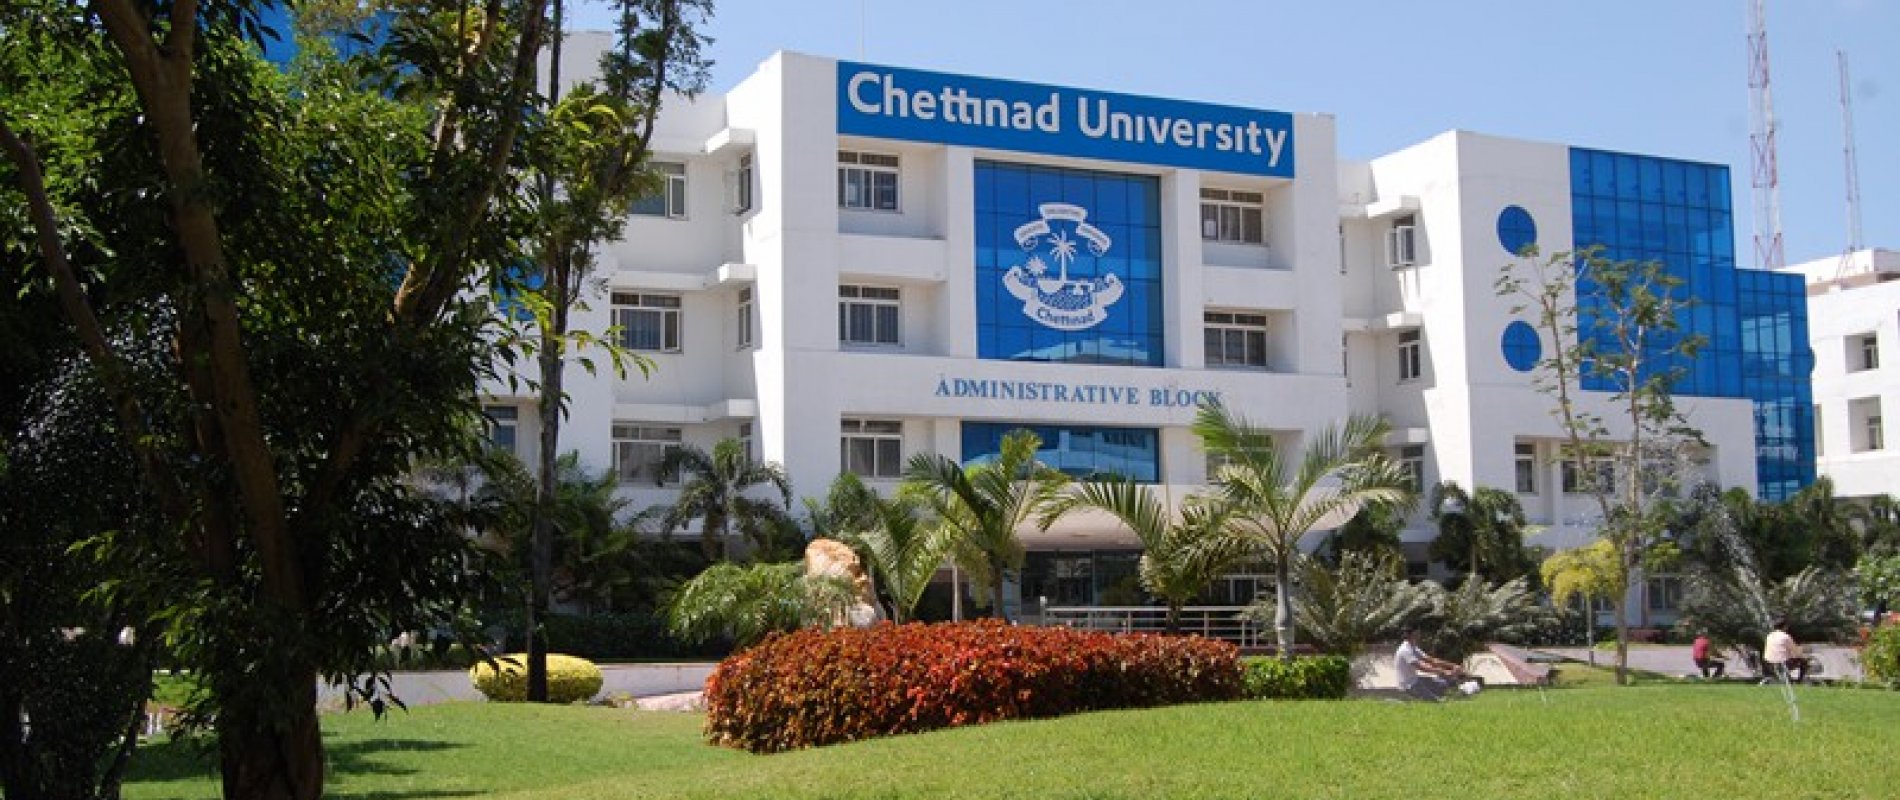 Chettinad Academy of Research and Education